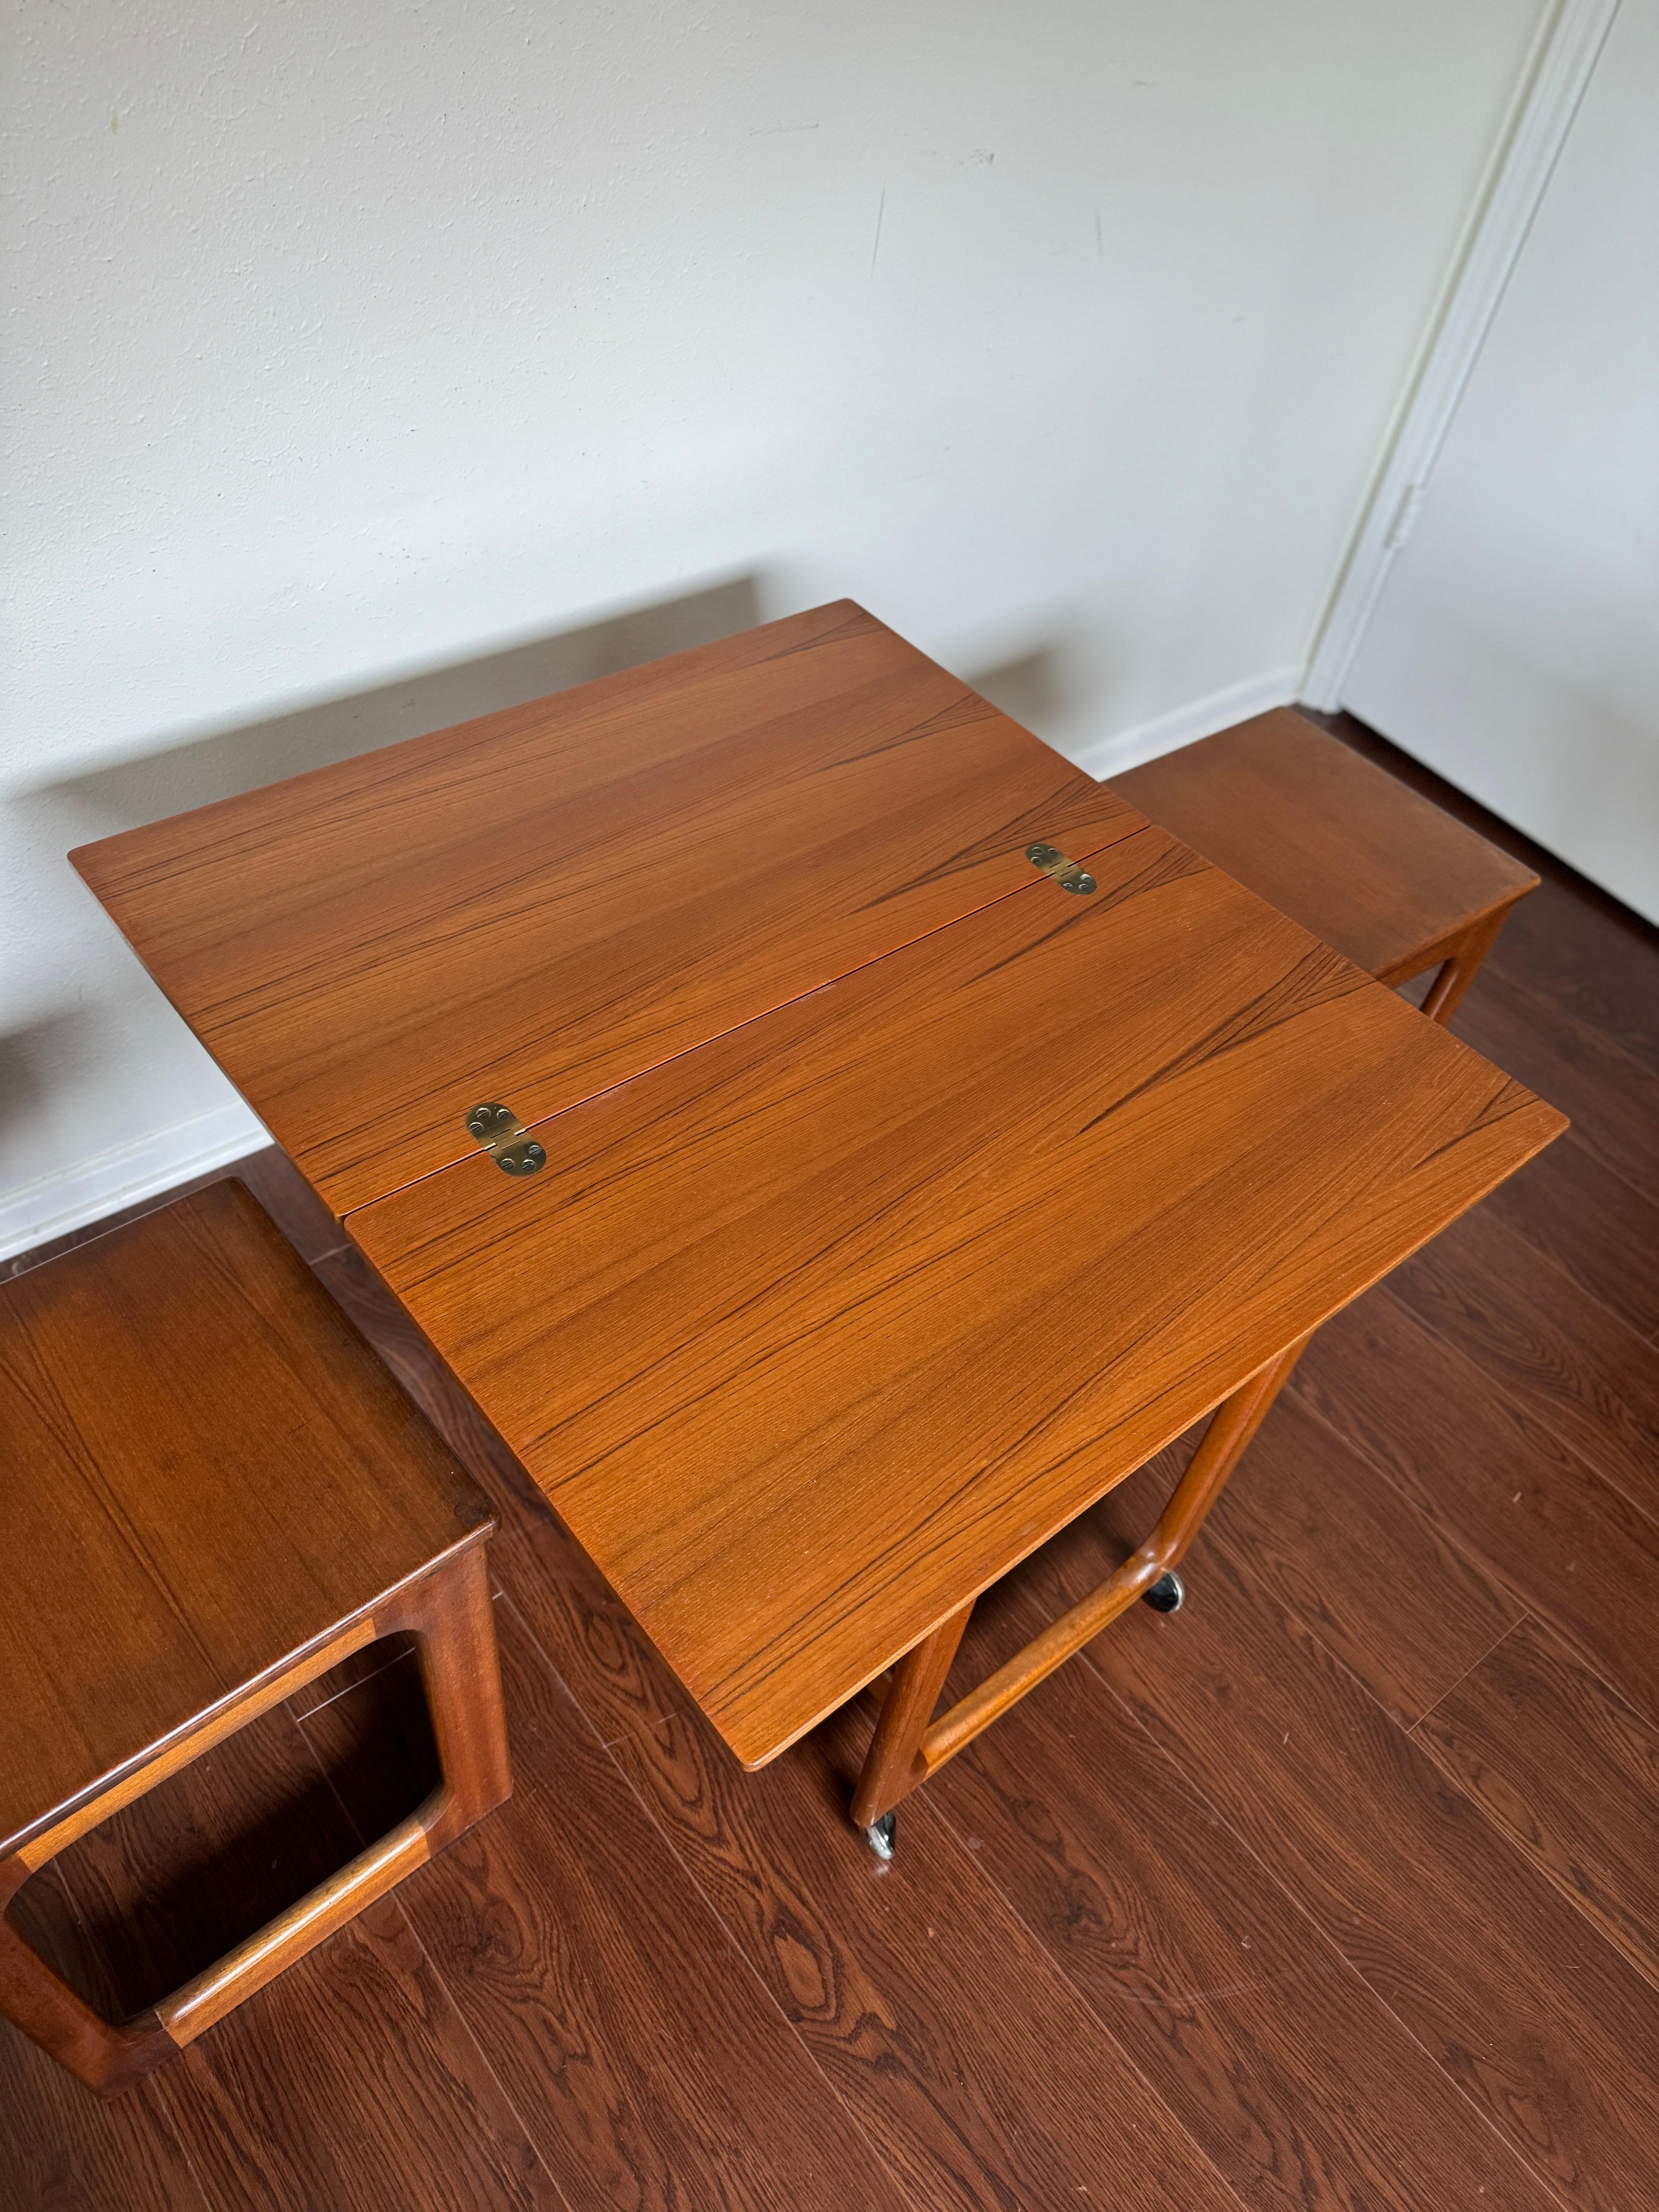 Multifunctional mid century extendable teak table by McIntosh, circa 1960s For Sale 1